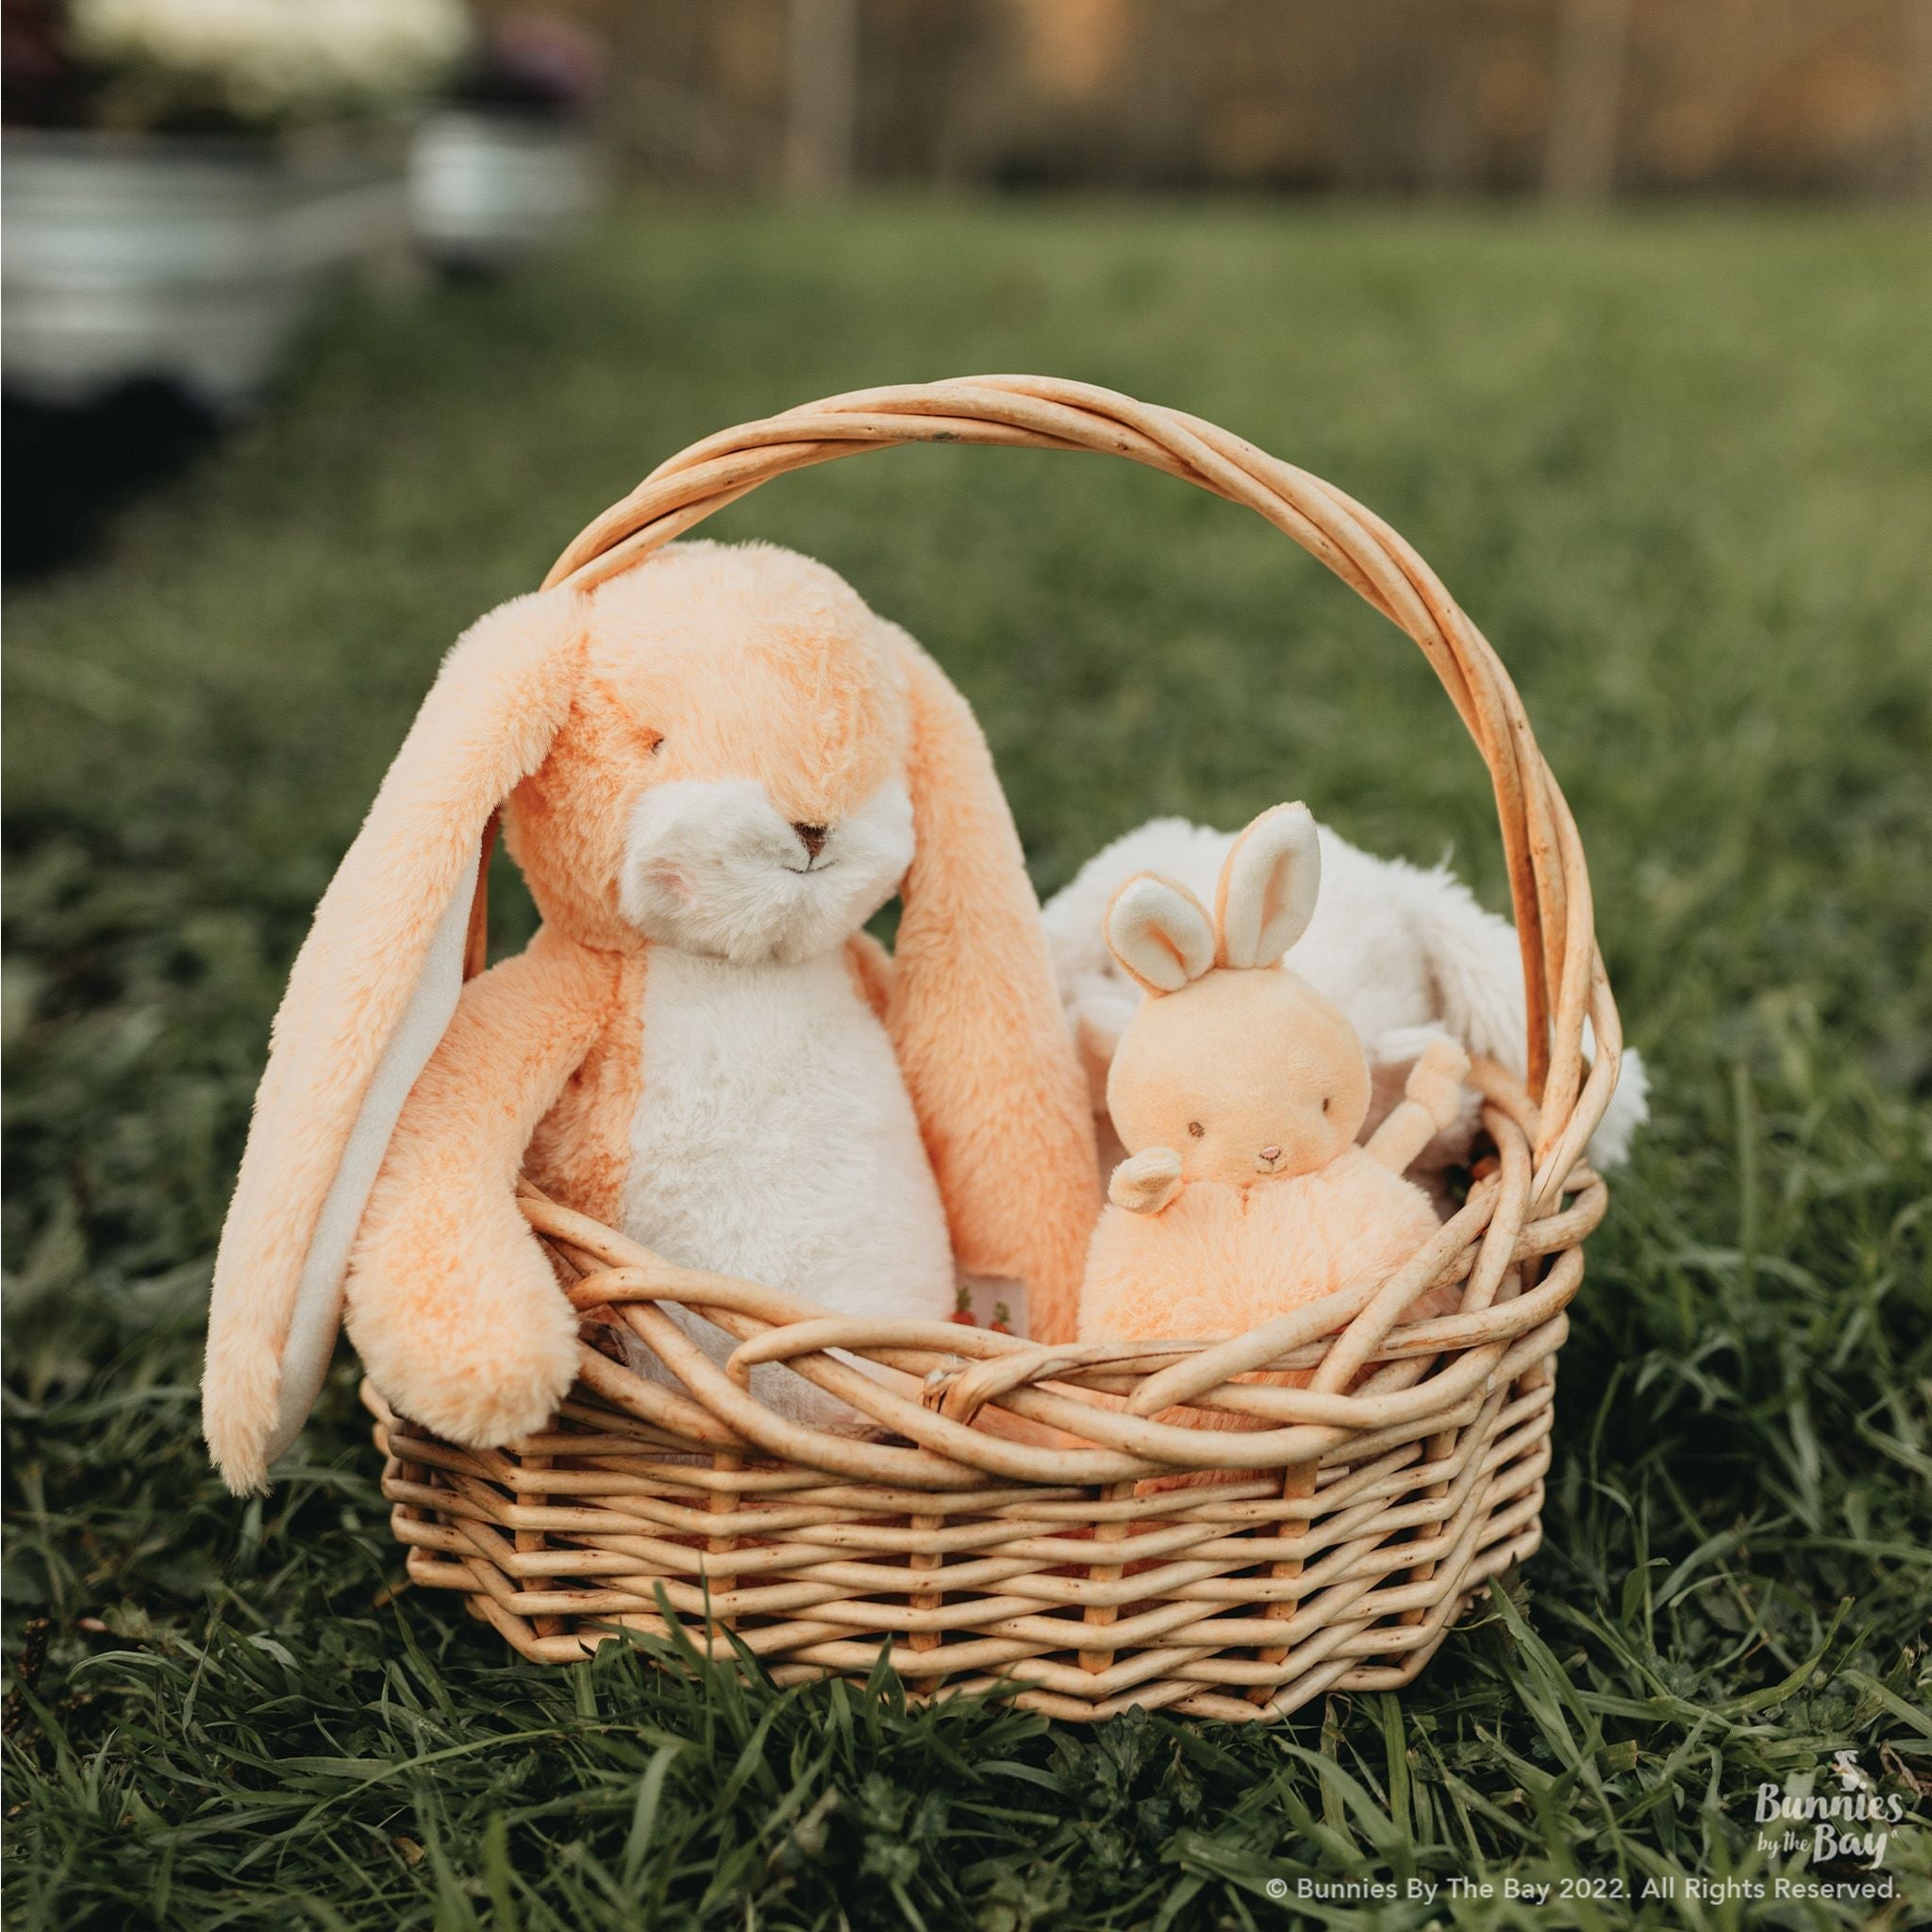 190317: Roly Poly - Apricot Cream Bunny